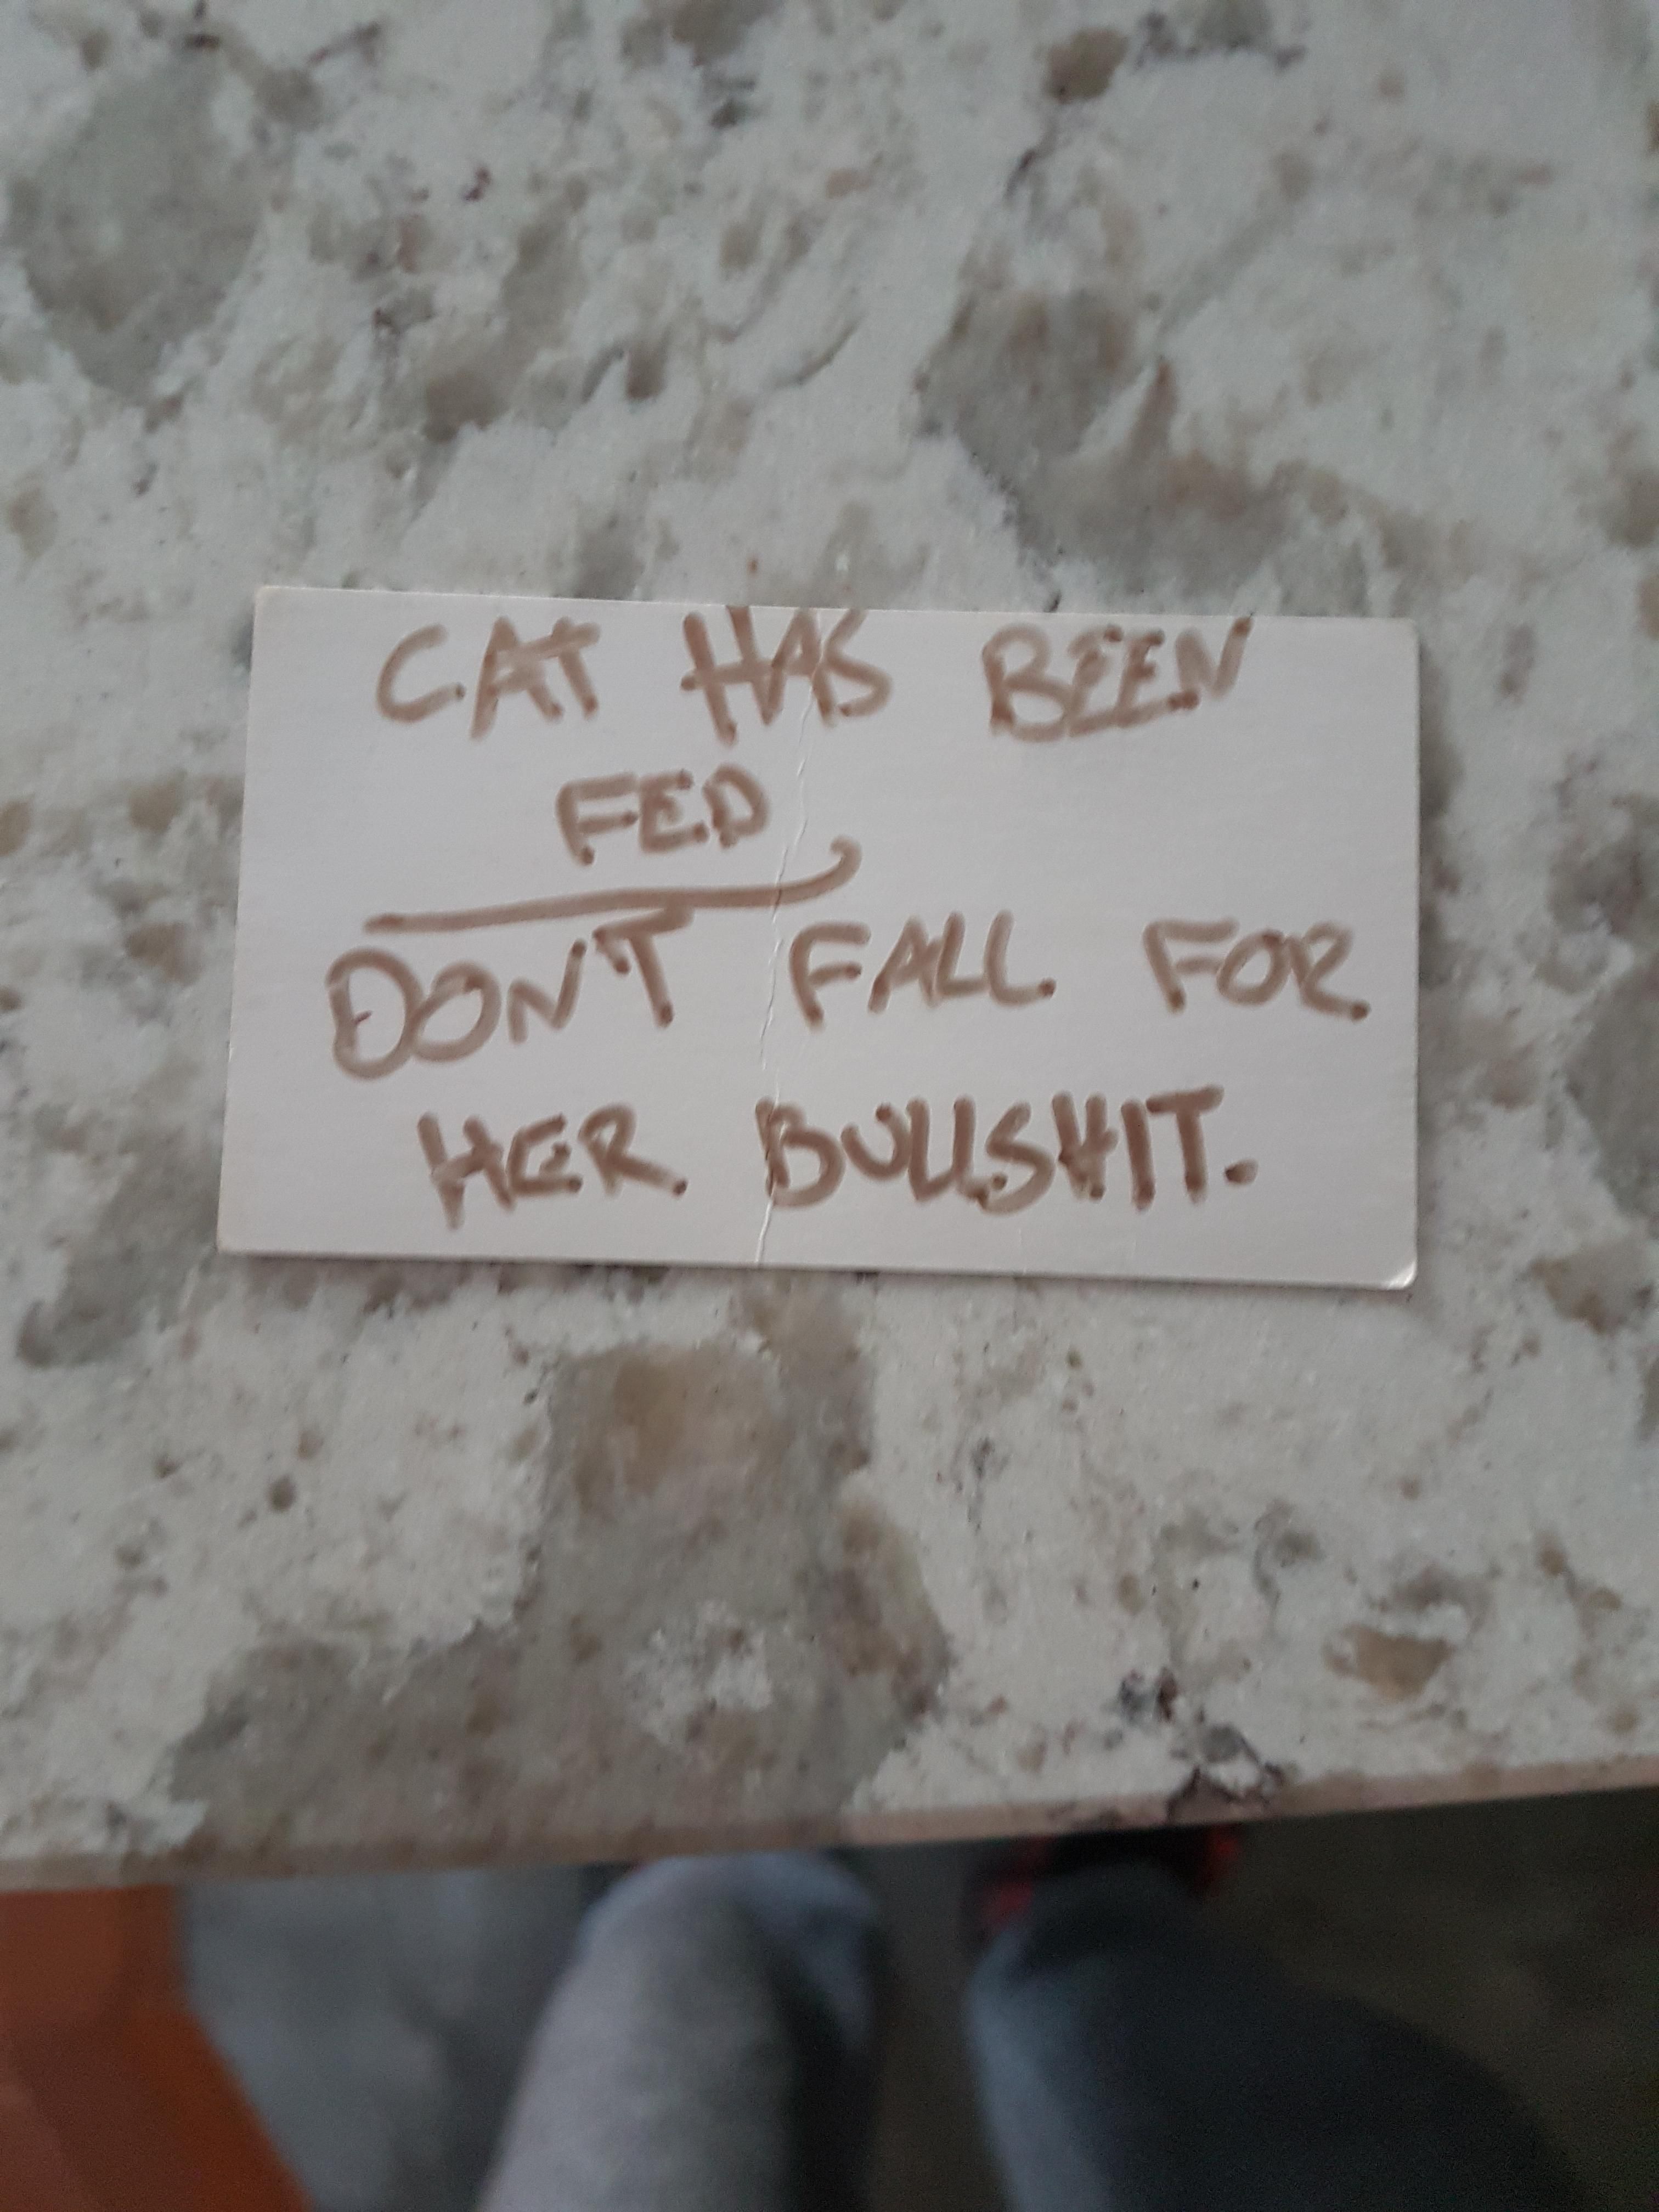 My parents new cat was being super cuddly with me this morning whenever I went near the kitchen. Eventually found this.